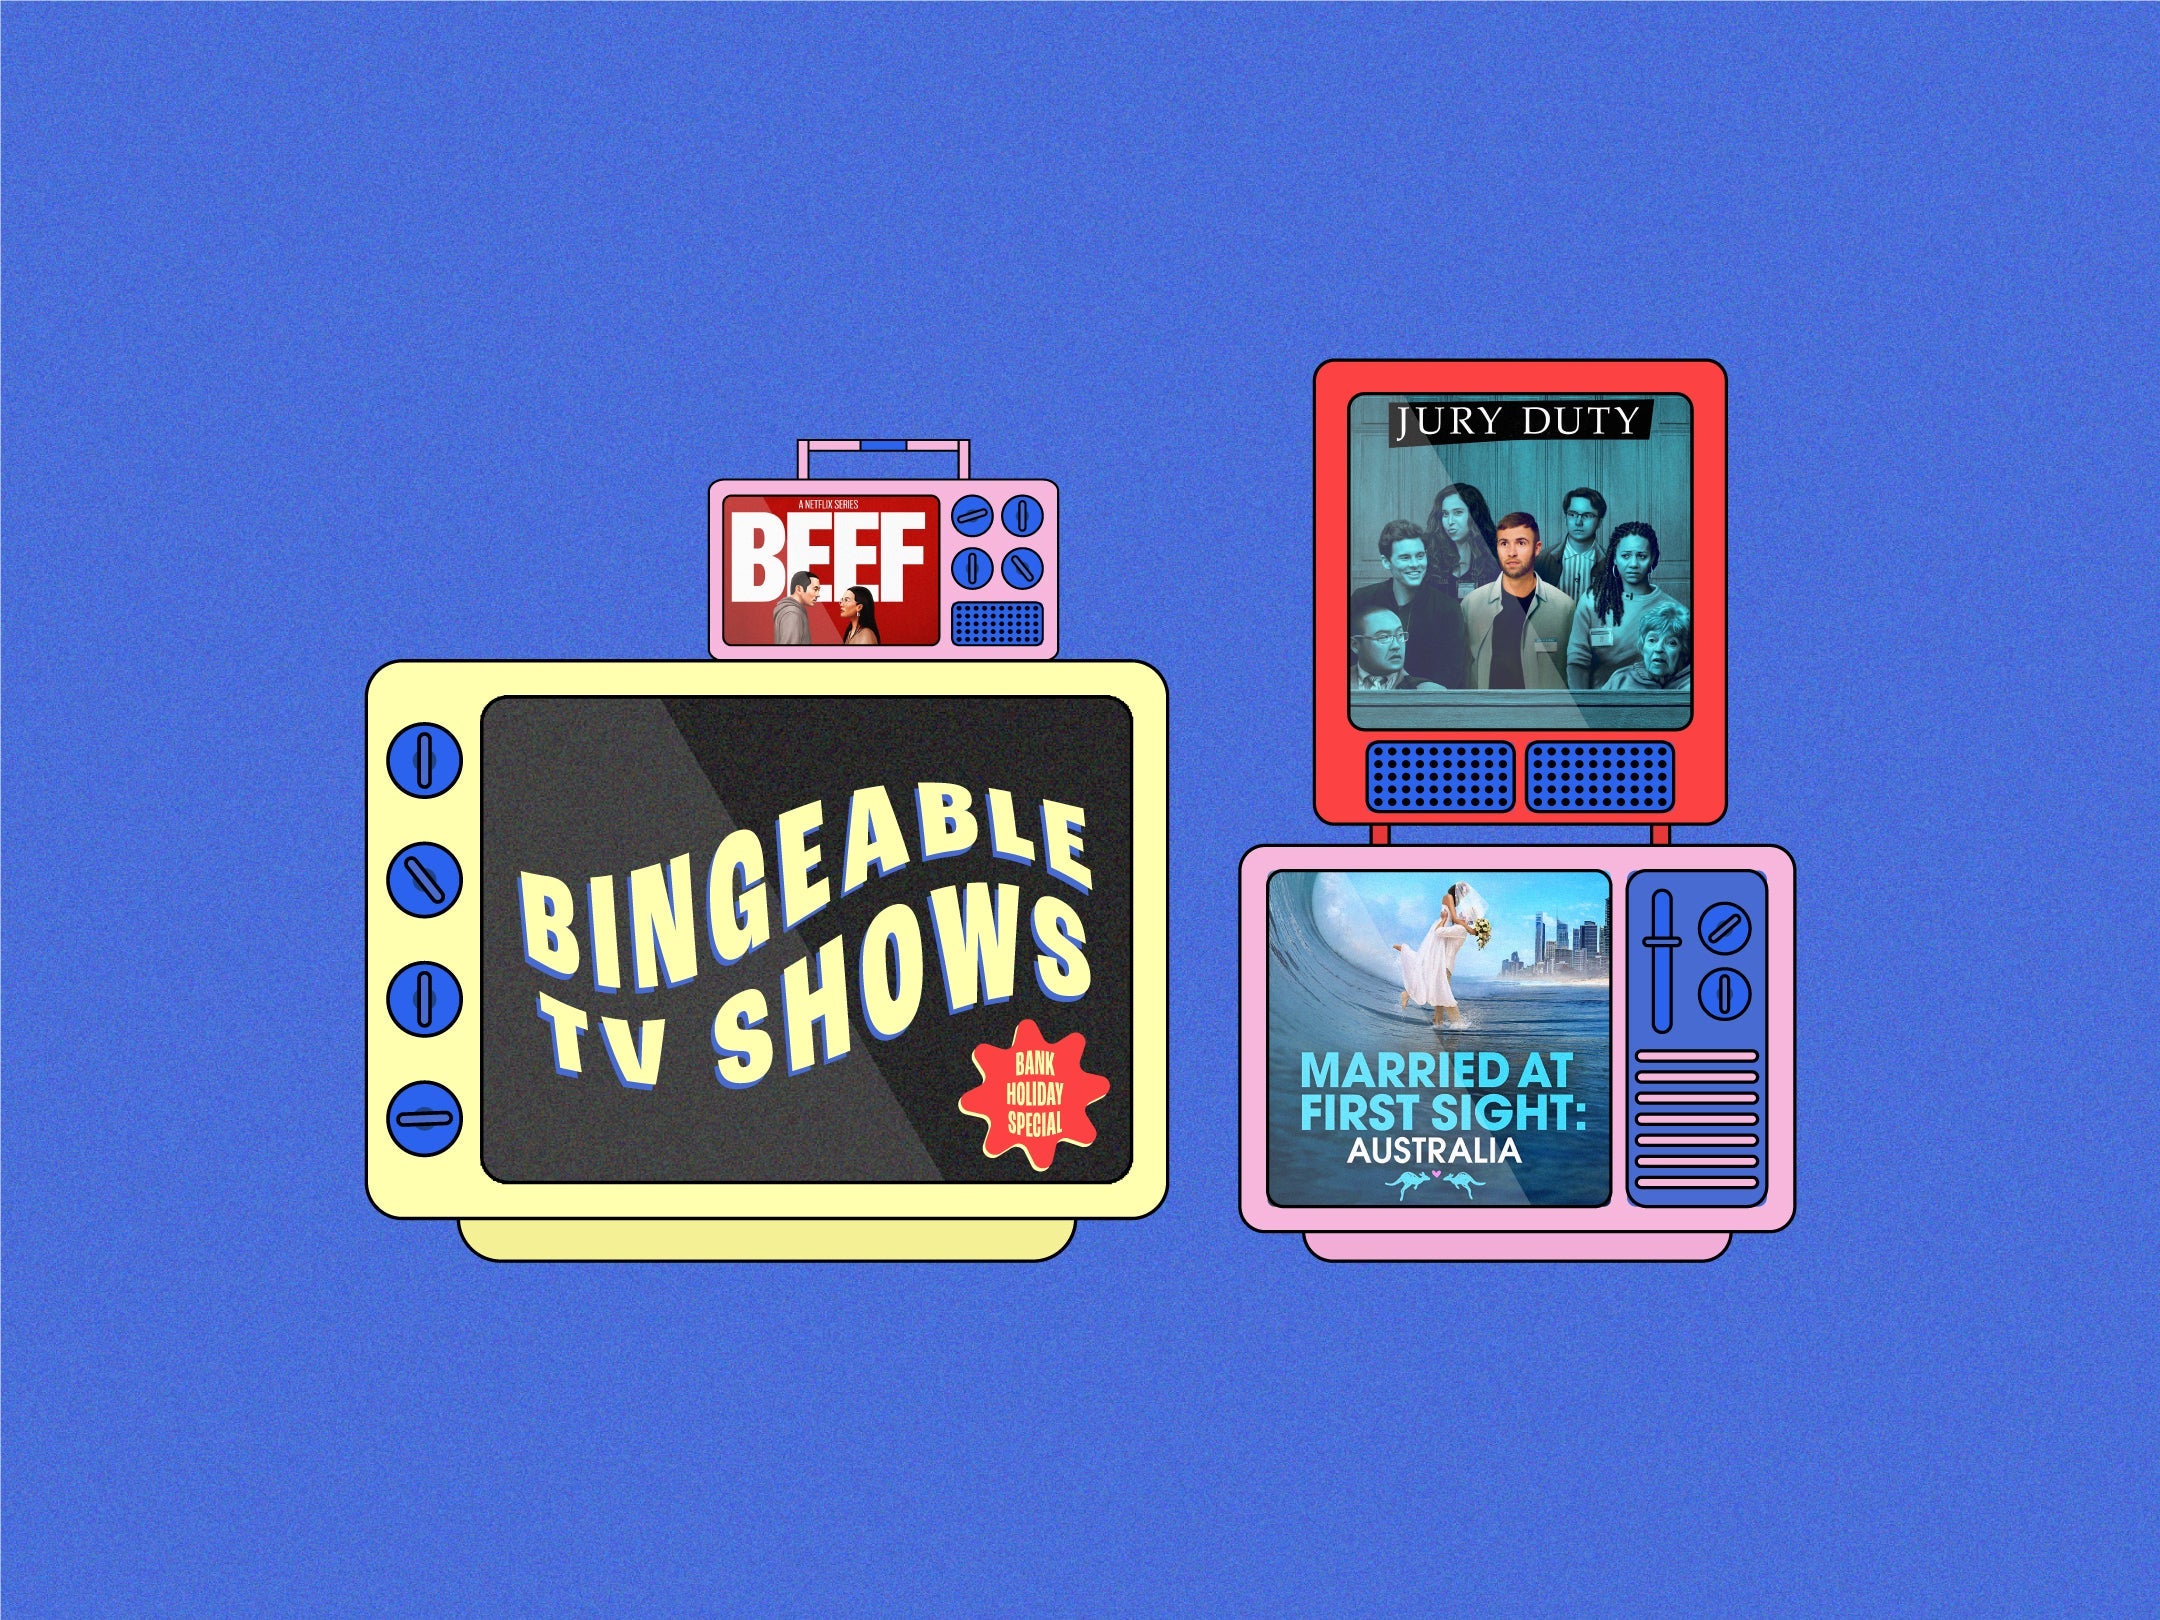 Our Top Bingeable TV Shows